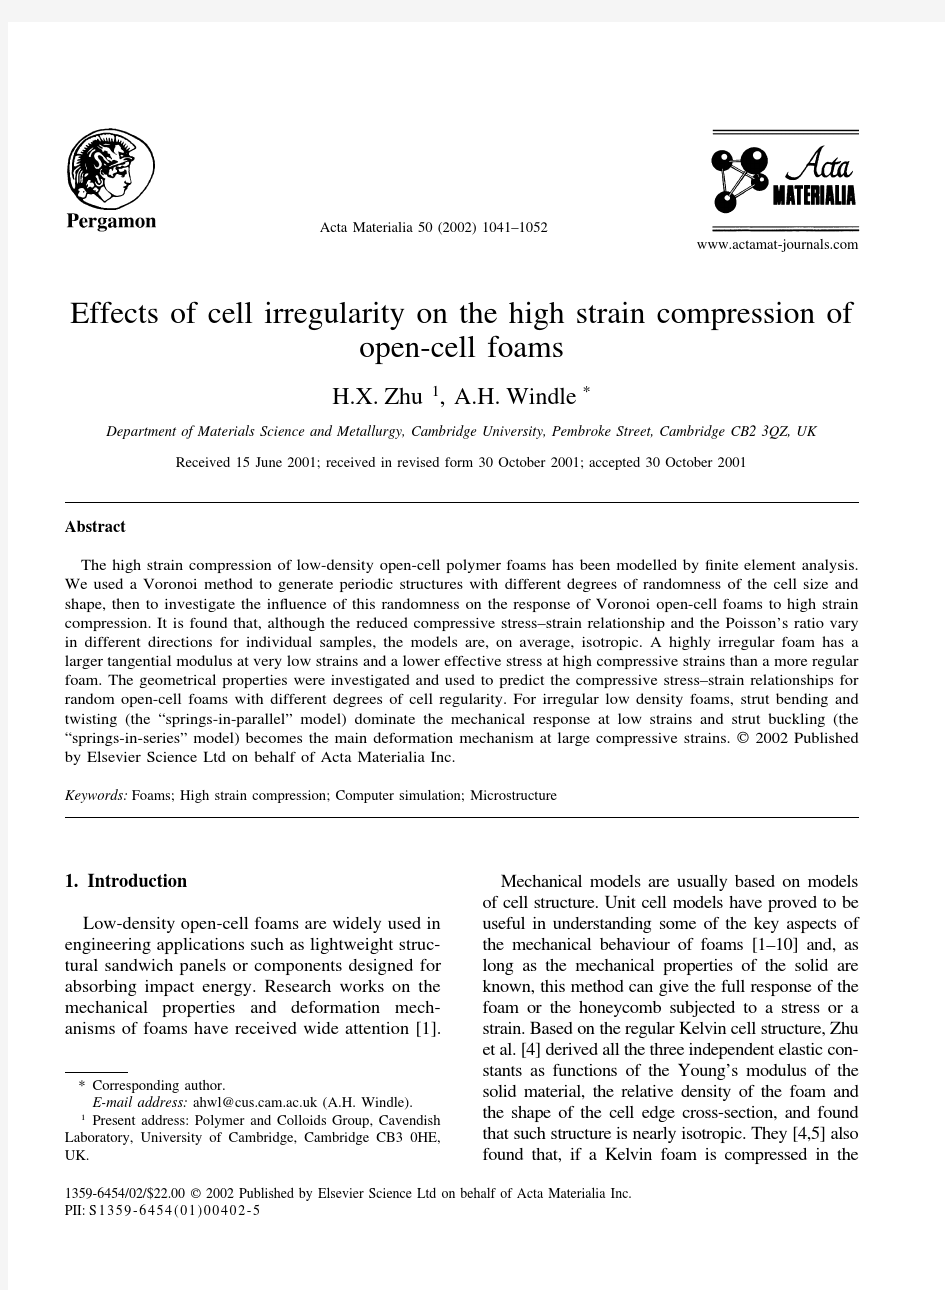 Effects of cell irregularity on the high strain compression of